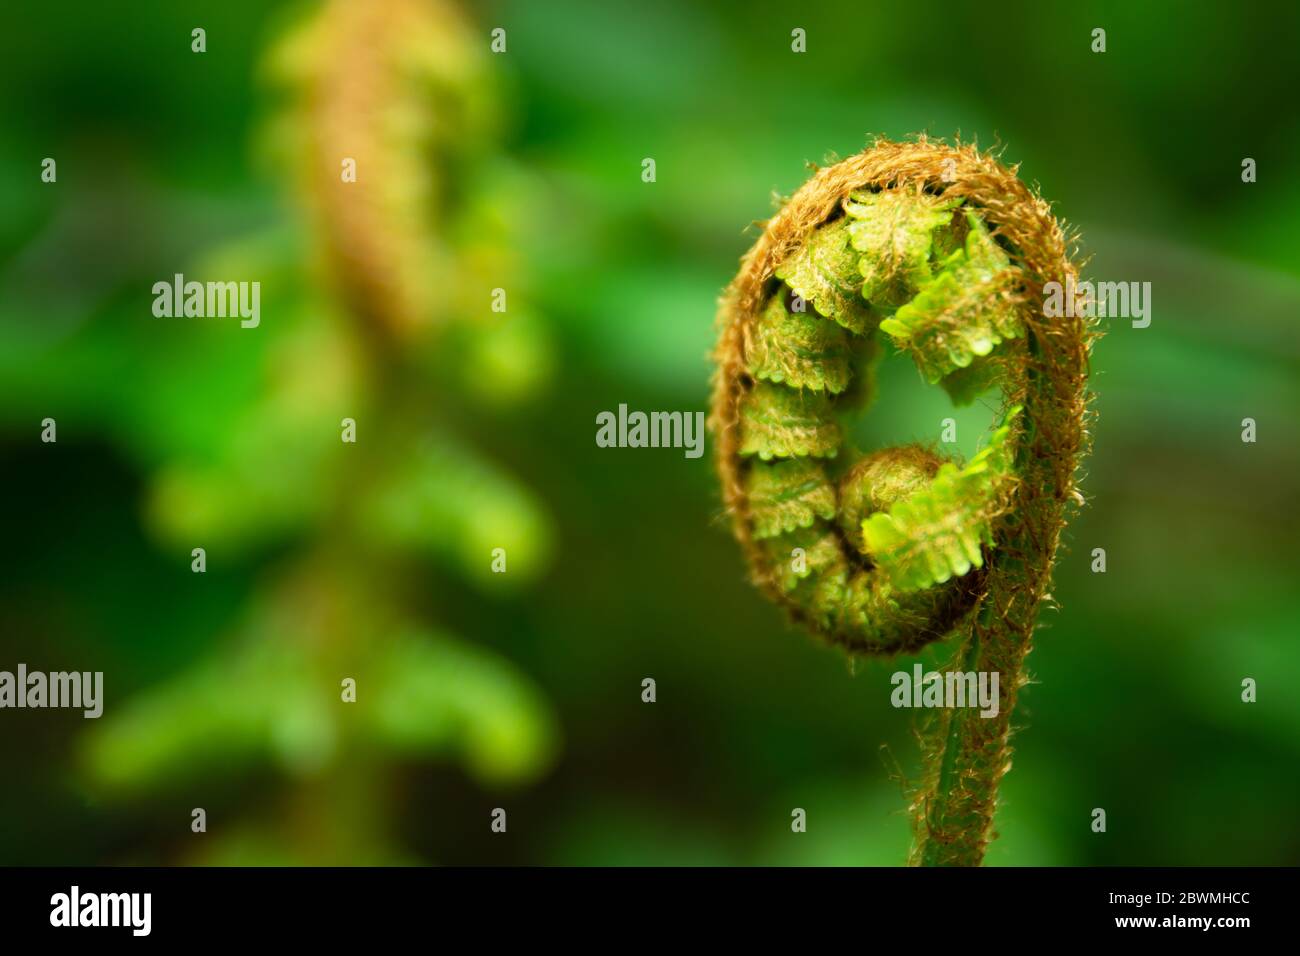 Coiled wild forest fern in natural habitat in close-up, spring day Stock Photo